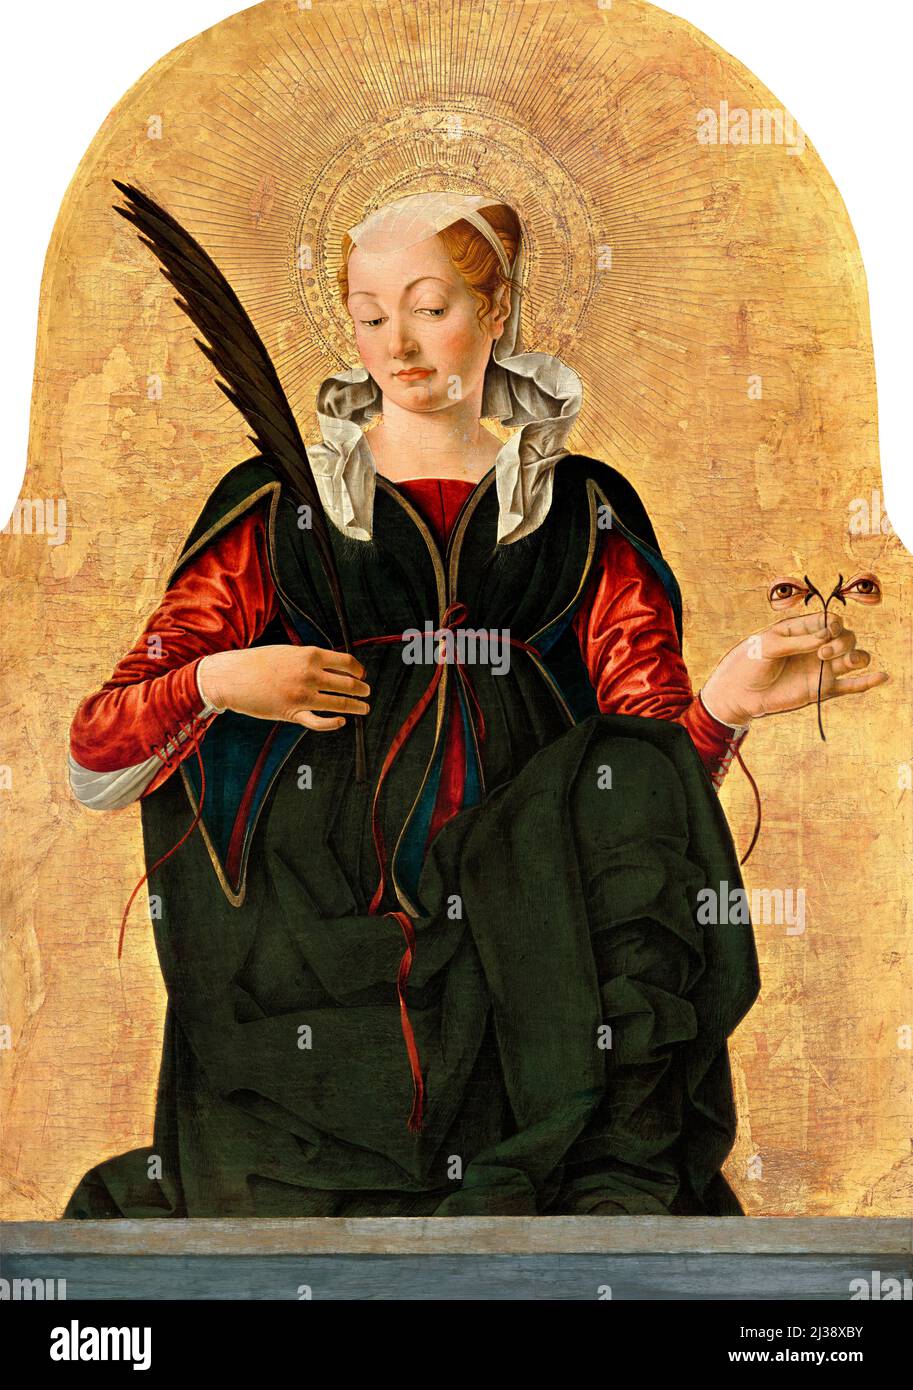 Saint Lucy by the Italian Renaissance painter, Francesco del Cossa (c. 1430 – c. 1477), tempera and gold on wood, 1472 Stock Photo